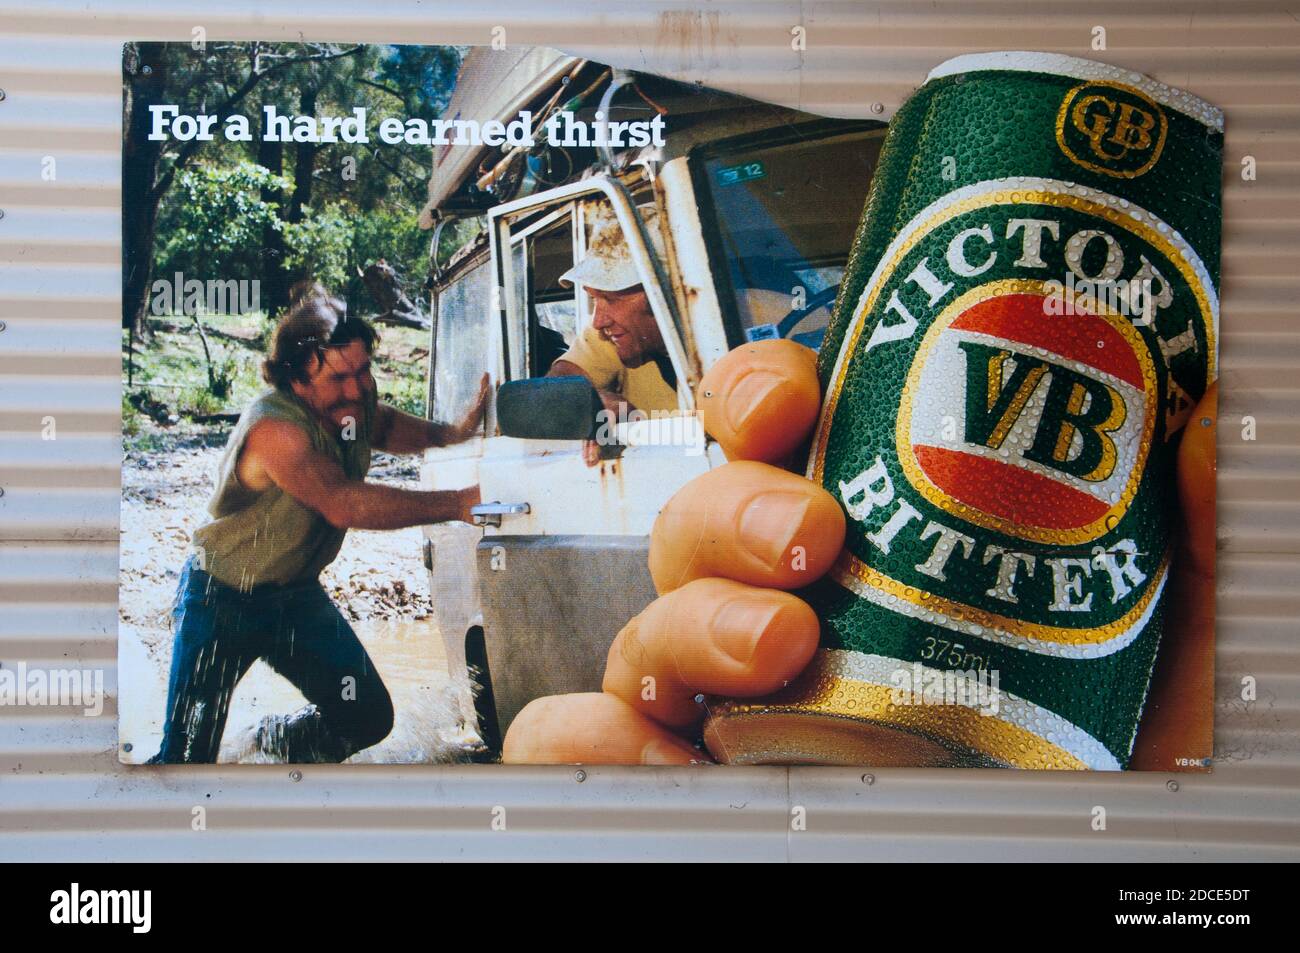 Beer advertisement in rural Victoria, Australia, pitches unashamedly old-fashioned masculine virtues of hard work and mateship. Stock Photo